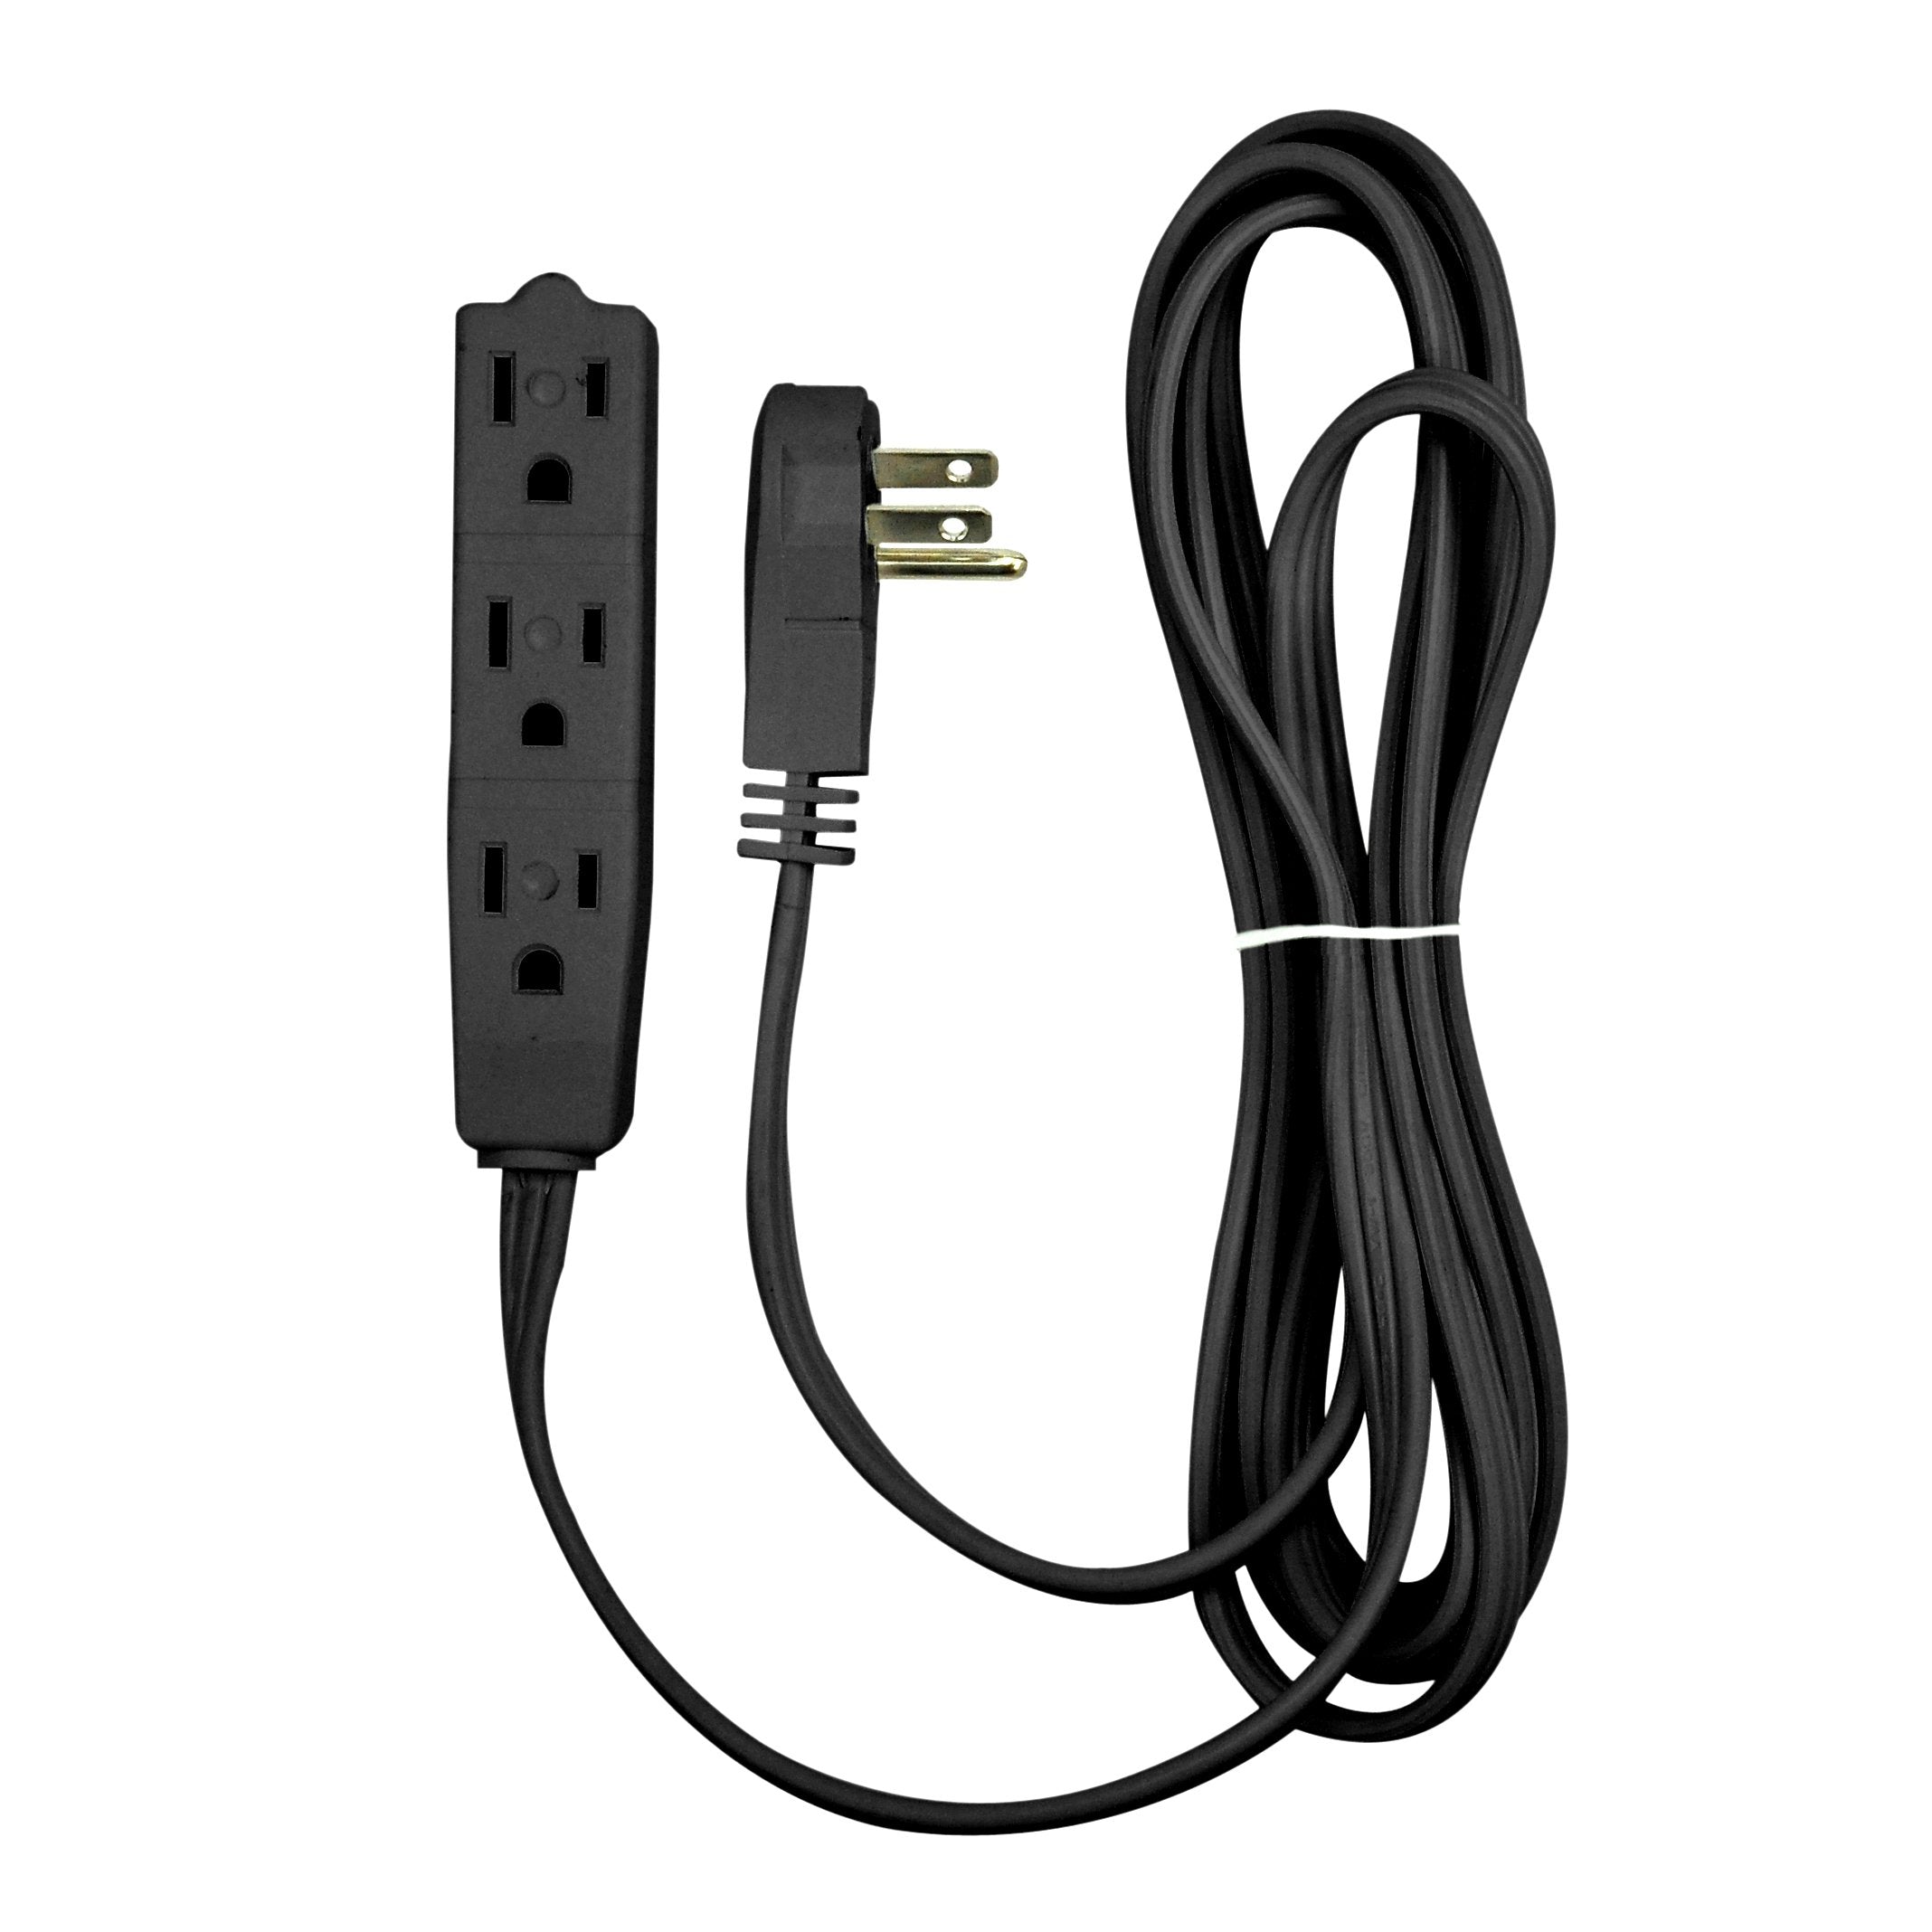 Flat Multiple Outlet Extension Cord for Indoor Use by Bindmaster- UL-Listed 3-Prong Multi Extension Wire- Space-Saving Flat Angled Extension Cord- Black  - Very Good